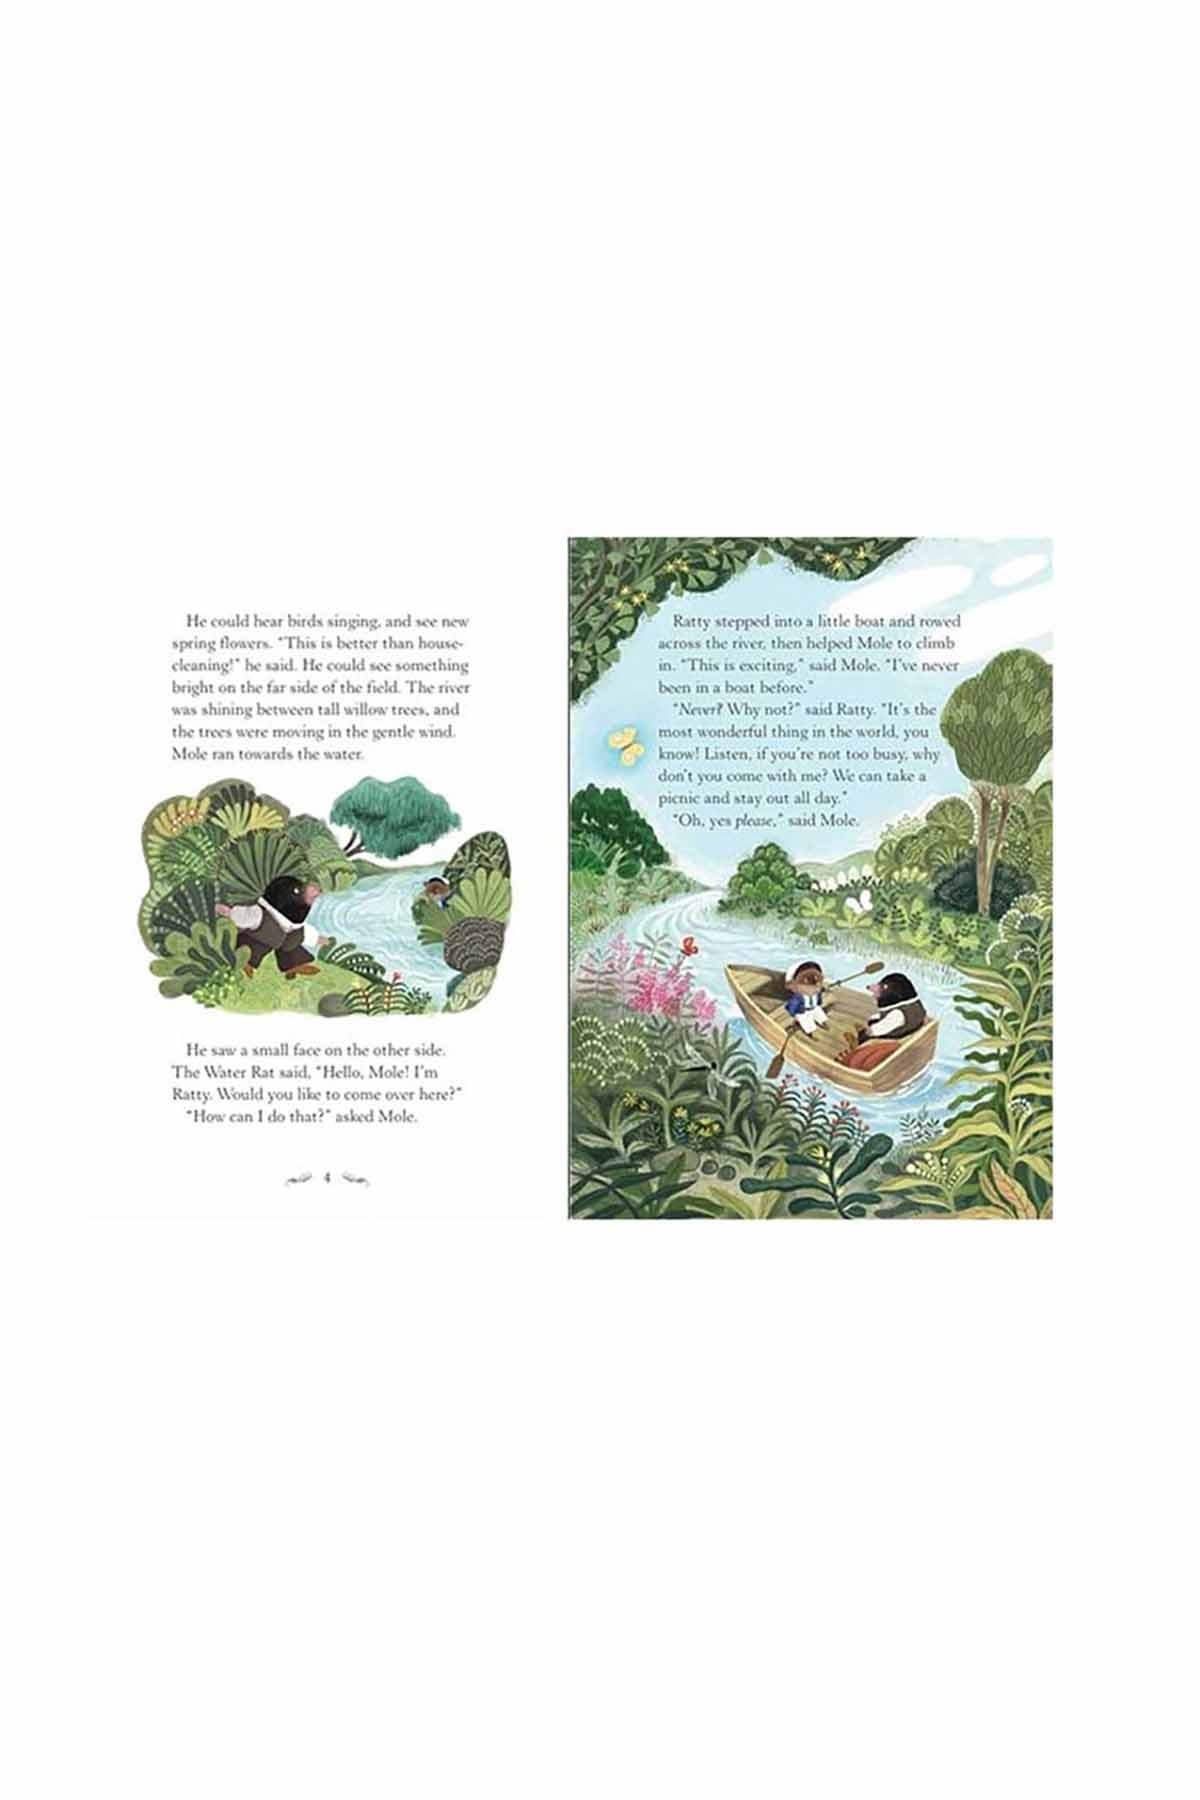 The Usborne The Wind in the Willows